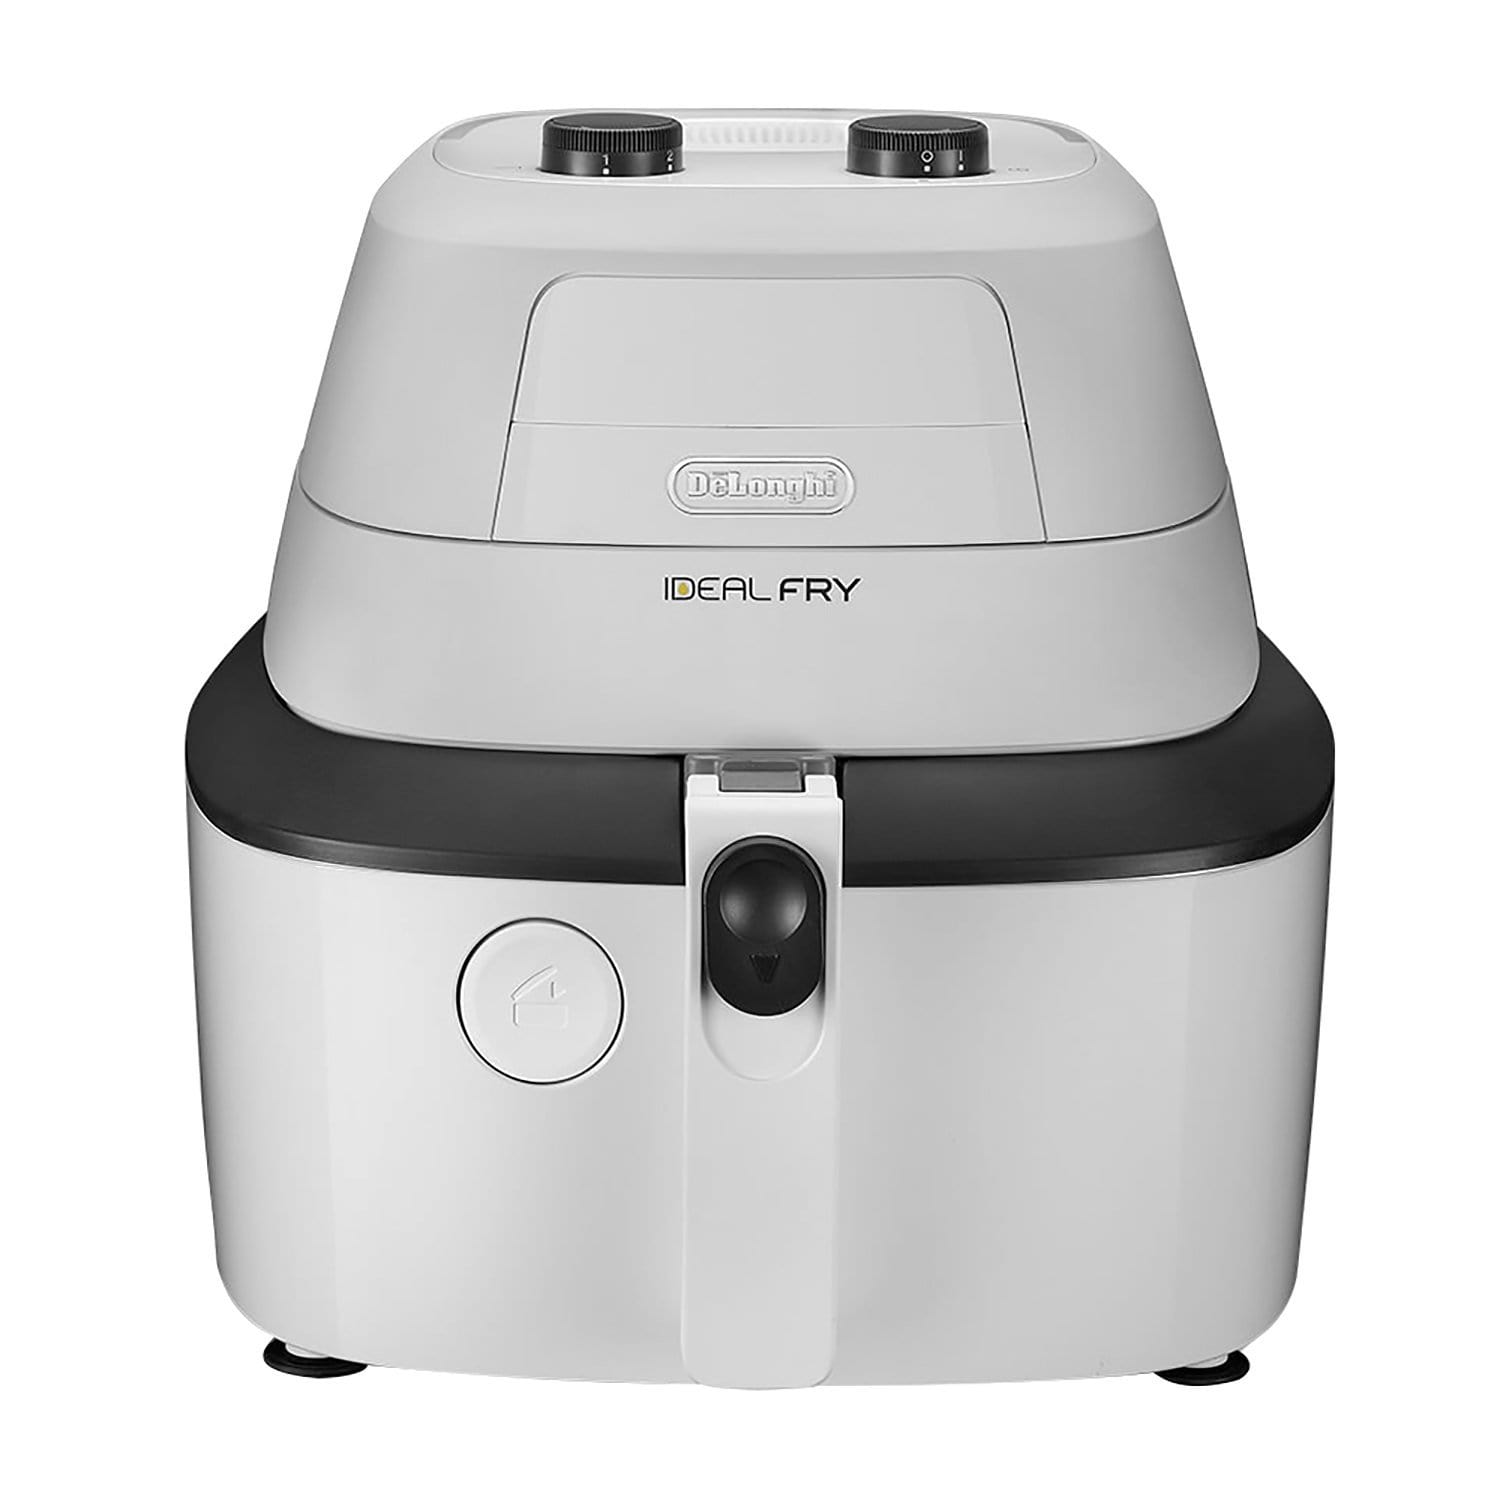 De'Longhi Ideal Fry Cooker White and Black - FH2101.W - Jashanmal Home